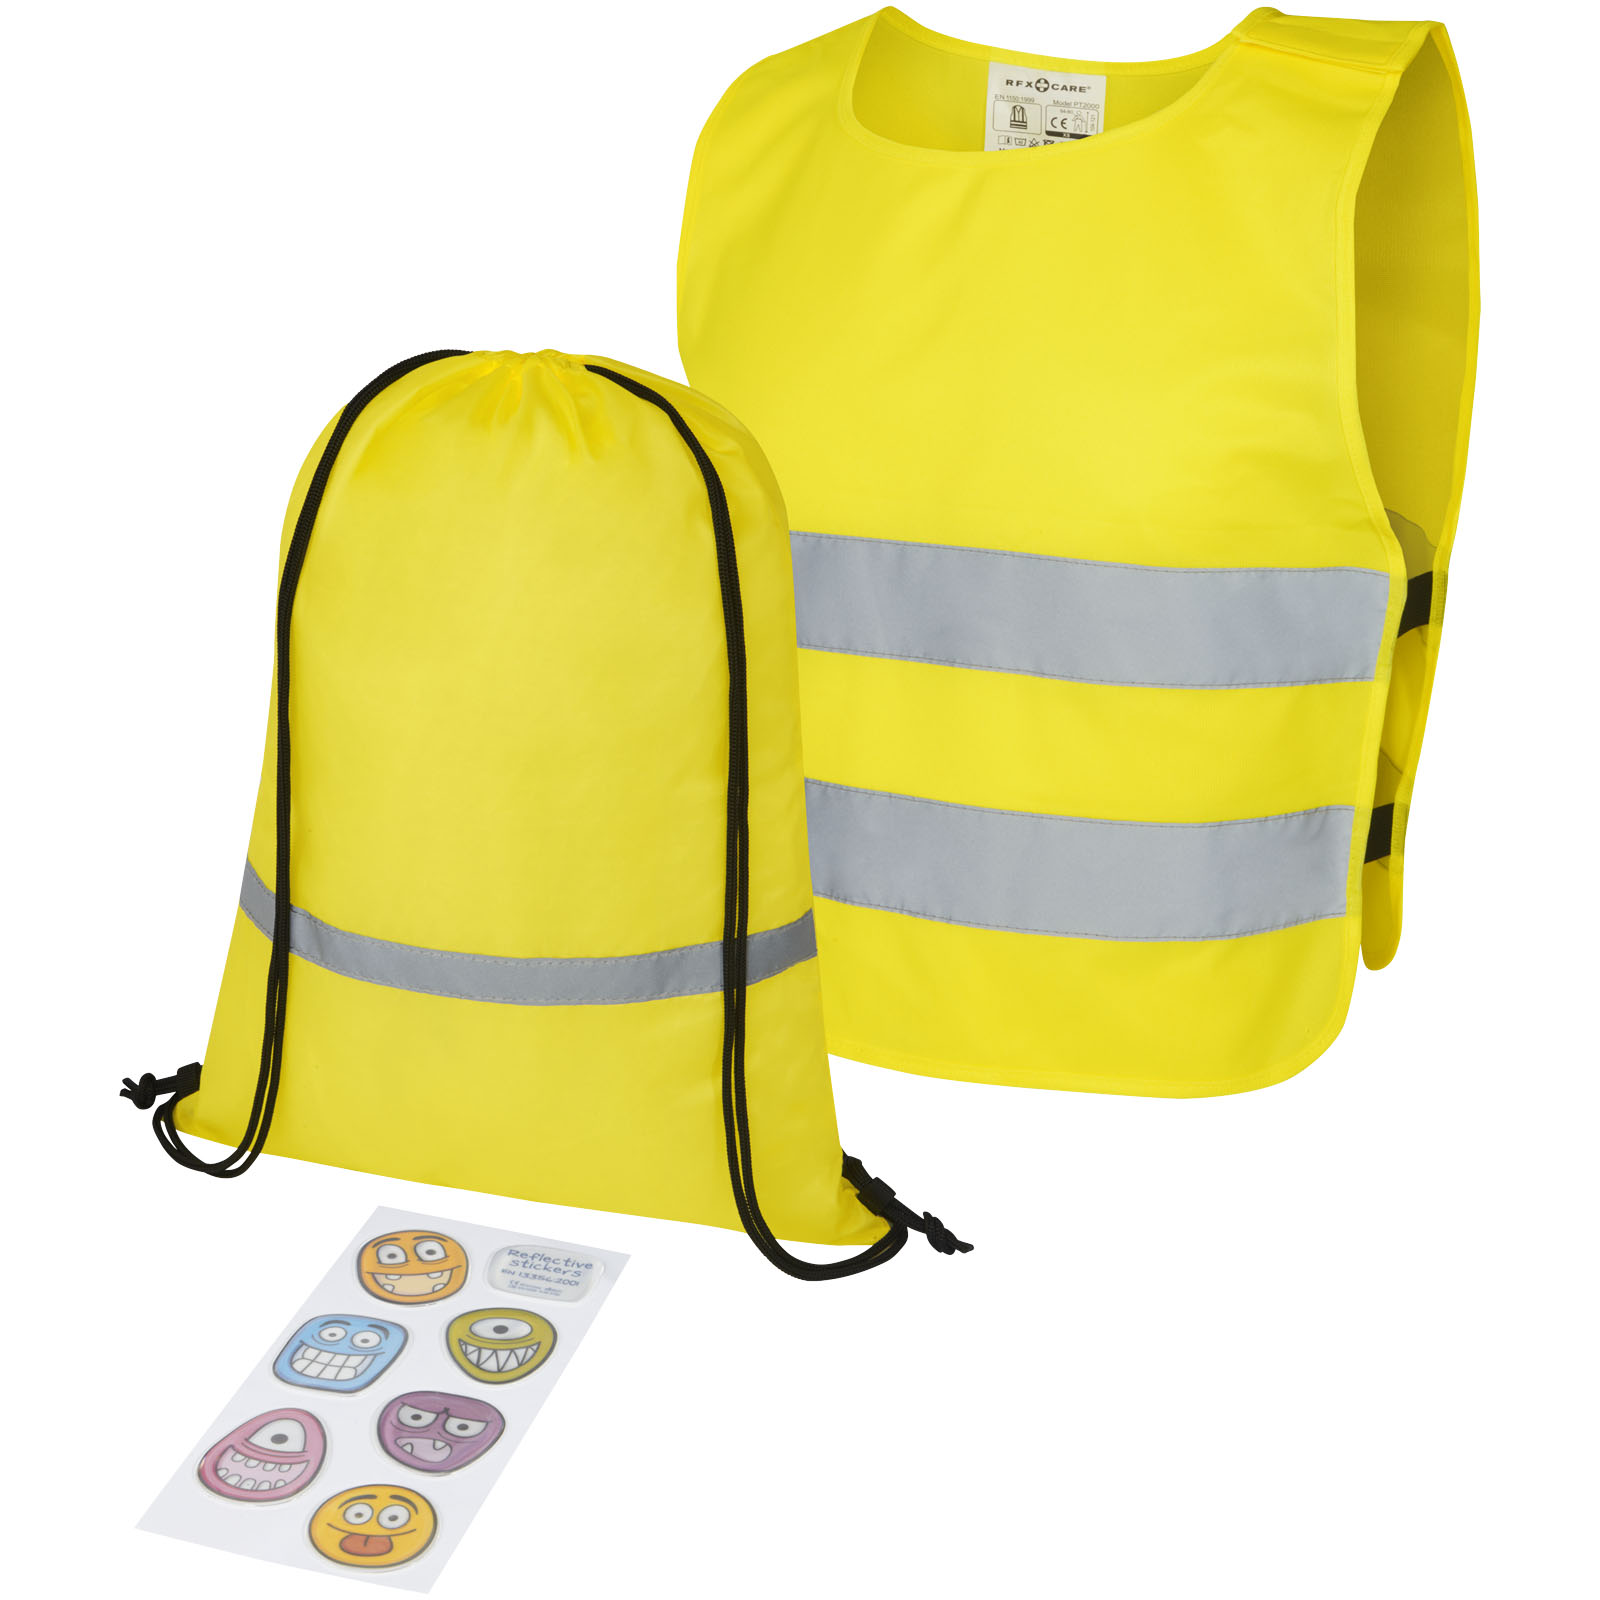 Children's Safety and Visibility Set - Knighton